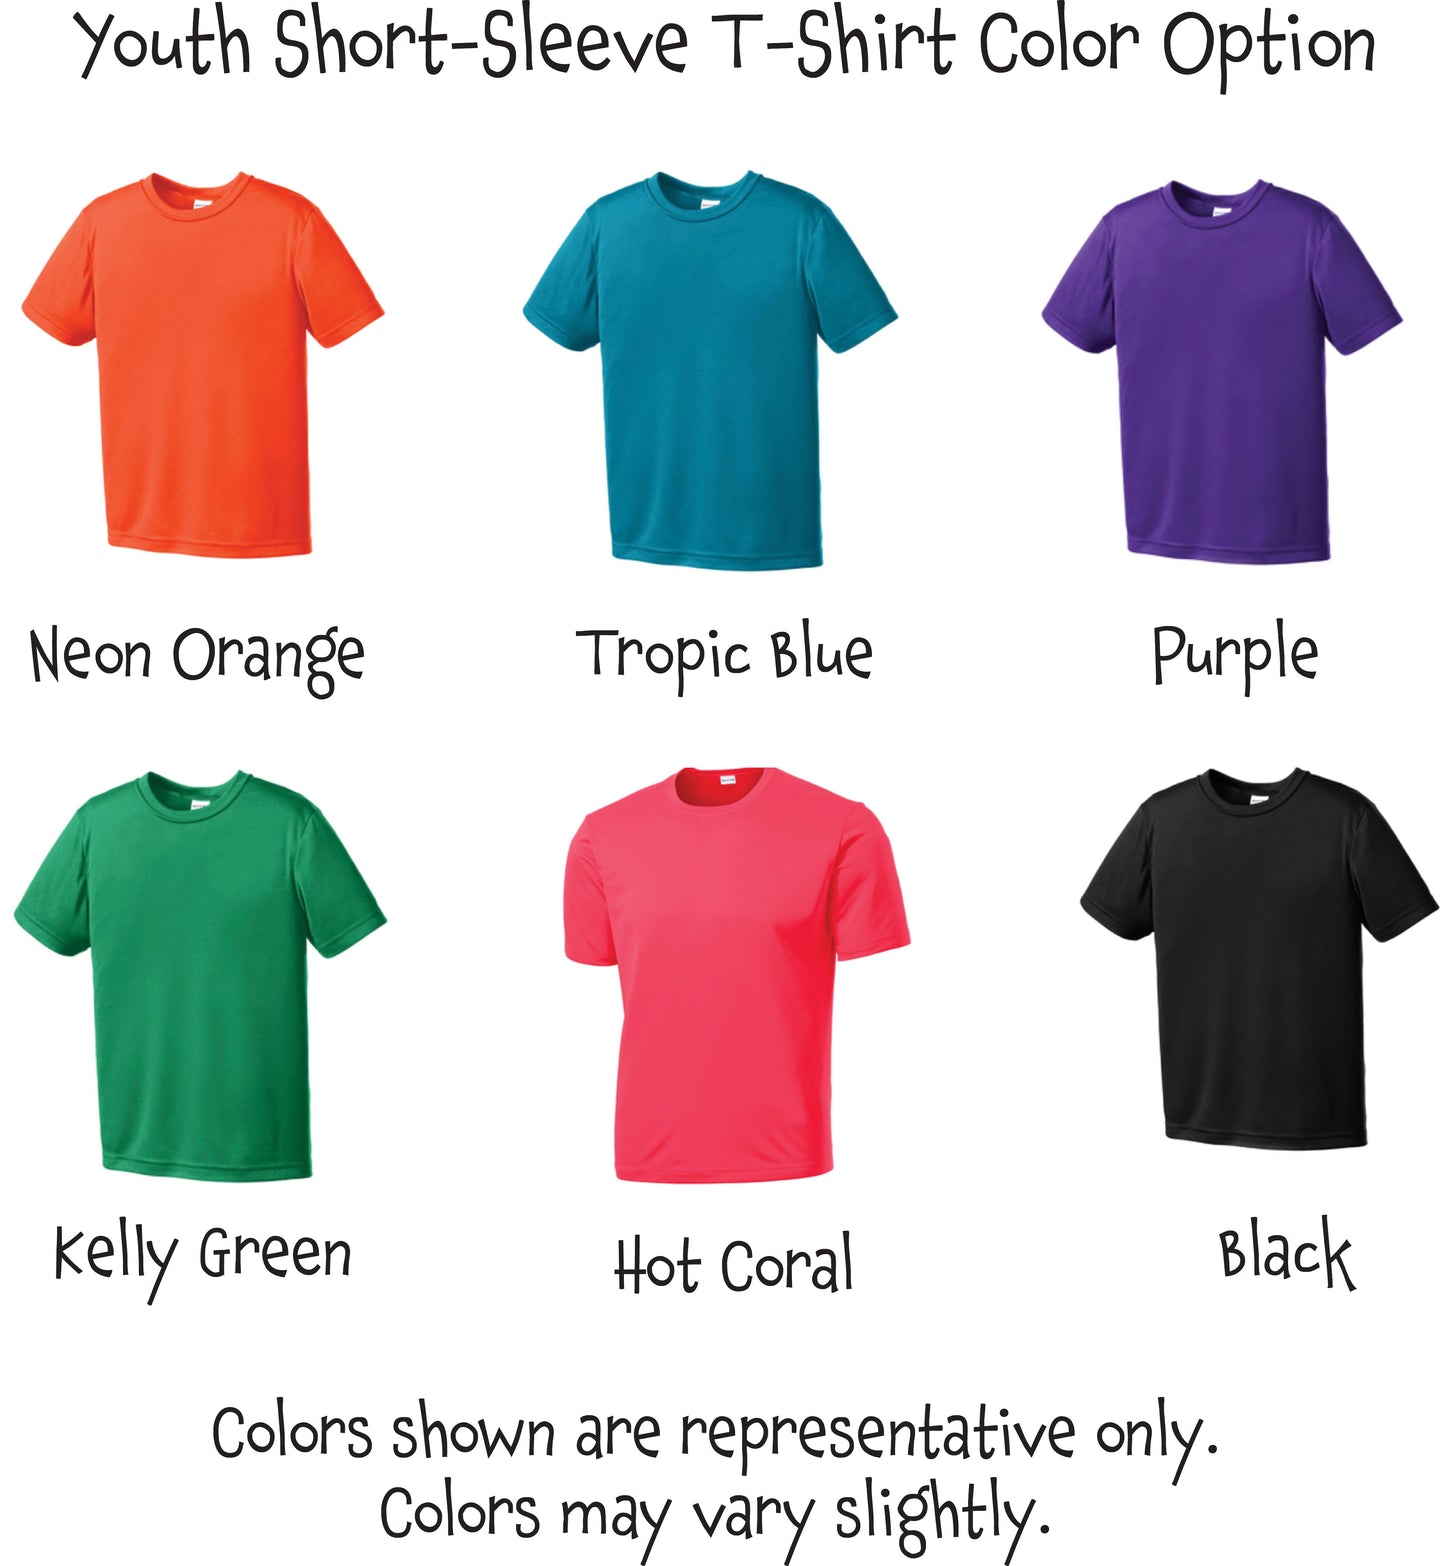 Dink Responsibly Pickleball | Youth Short Sleeve Athletic Shirt | 100% Polyester